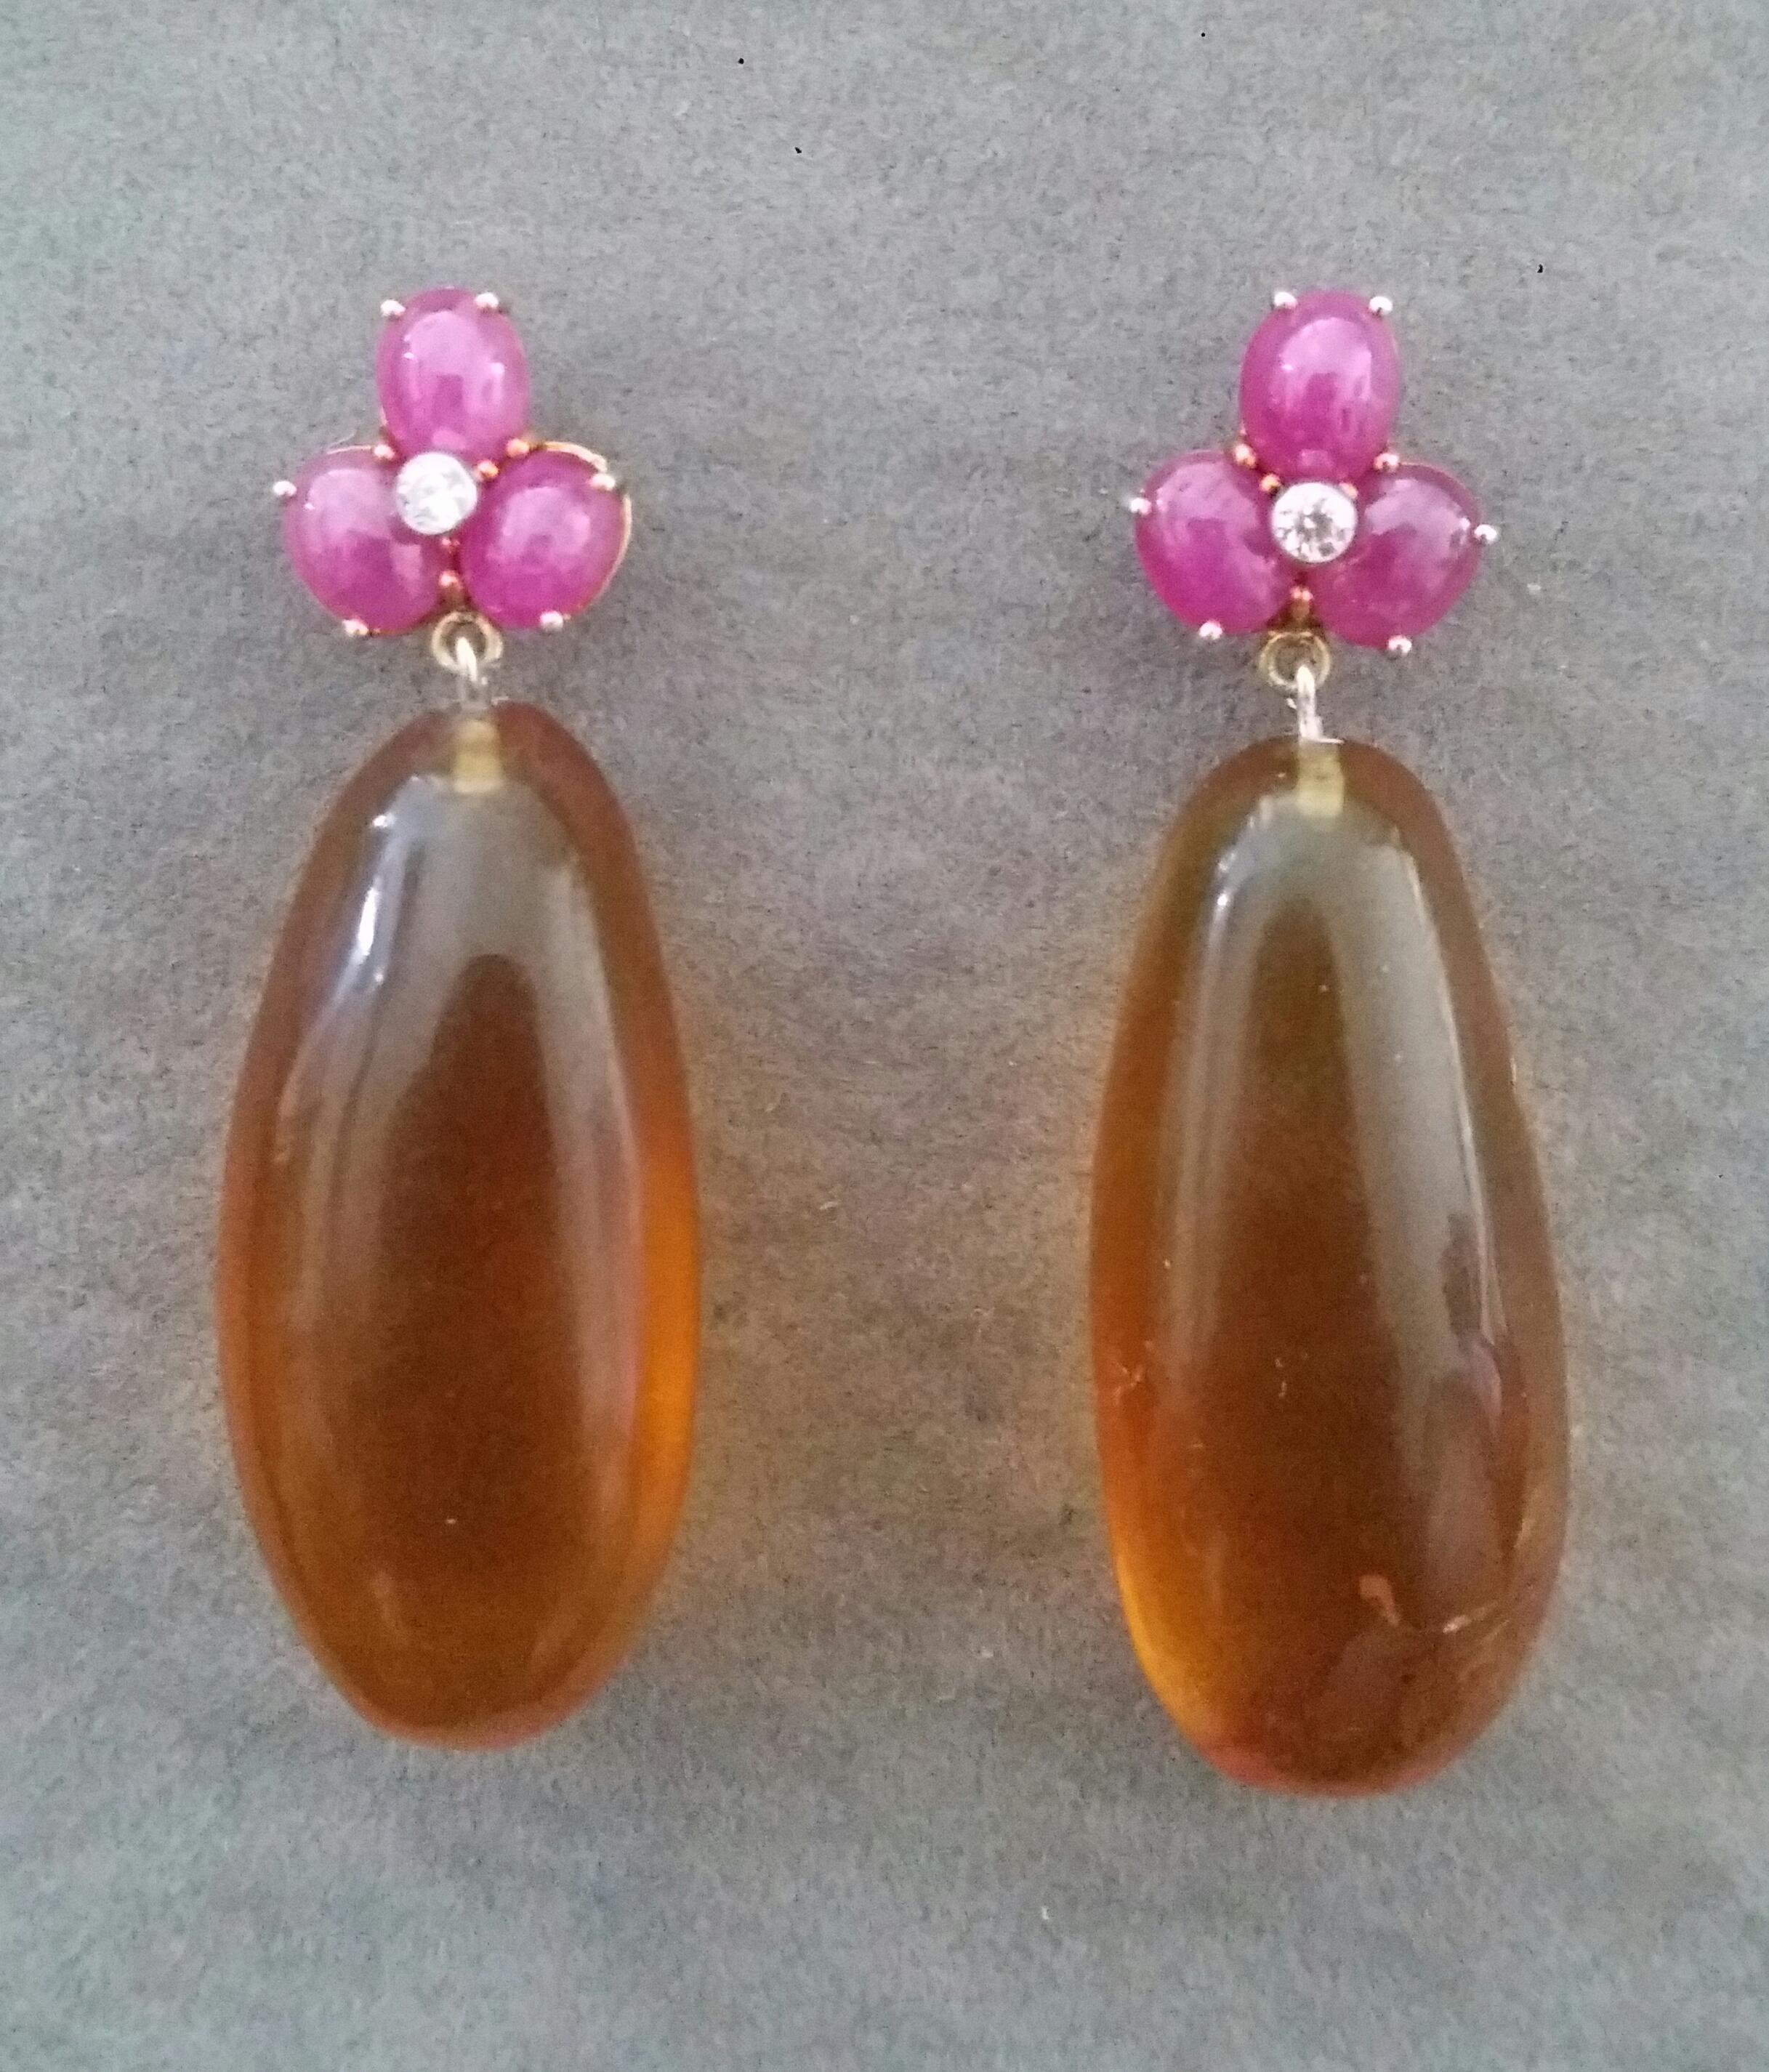 Elegant and completely handmade Earrings consisting of an upper part of 3 oval shape Ruby cabs of 4 mm x 5 mm set together in 14 Kt yellow gold with 2 small diamonds in the center, at the bottom 2 nice Pear Shape Natural Burmese Honey Amber 